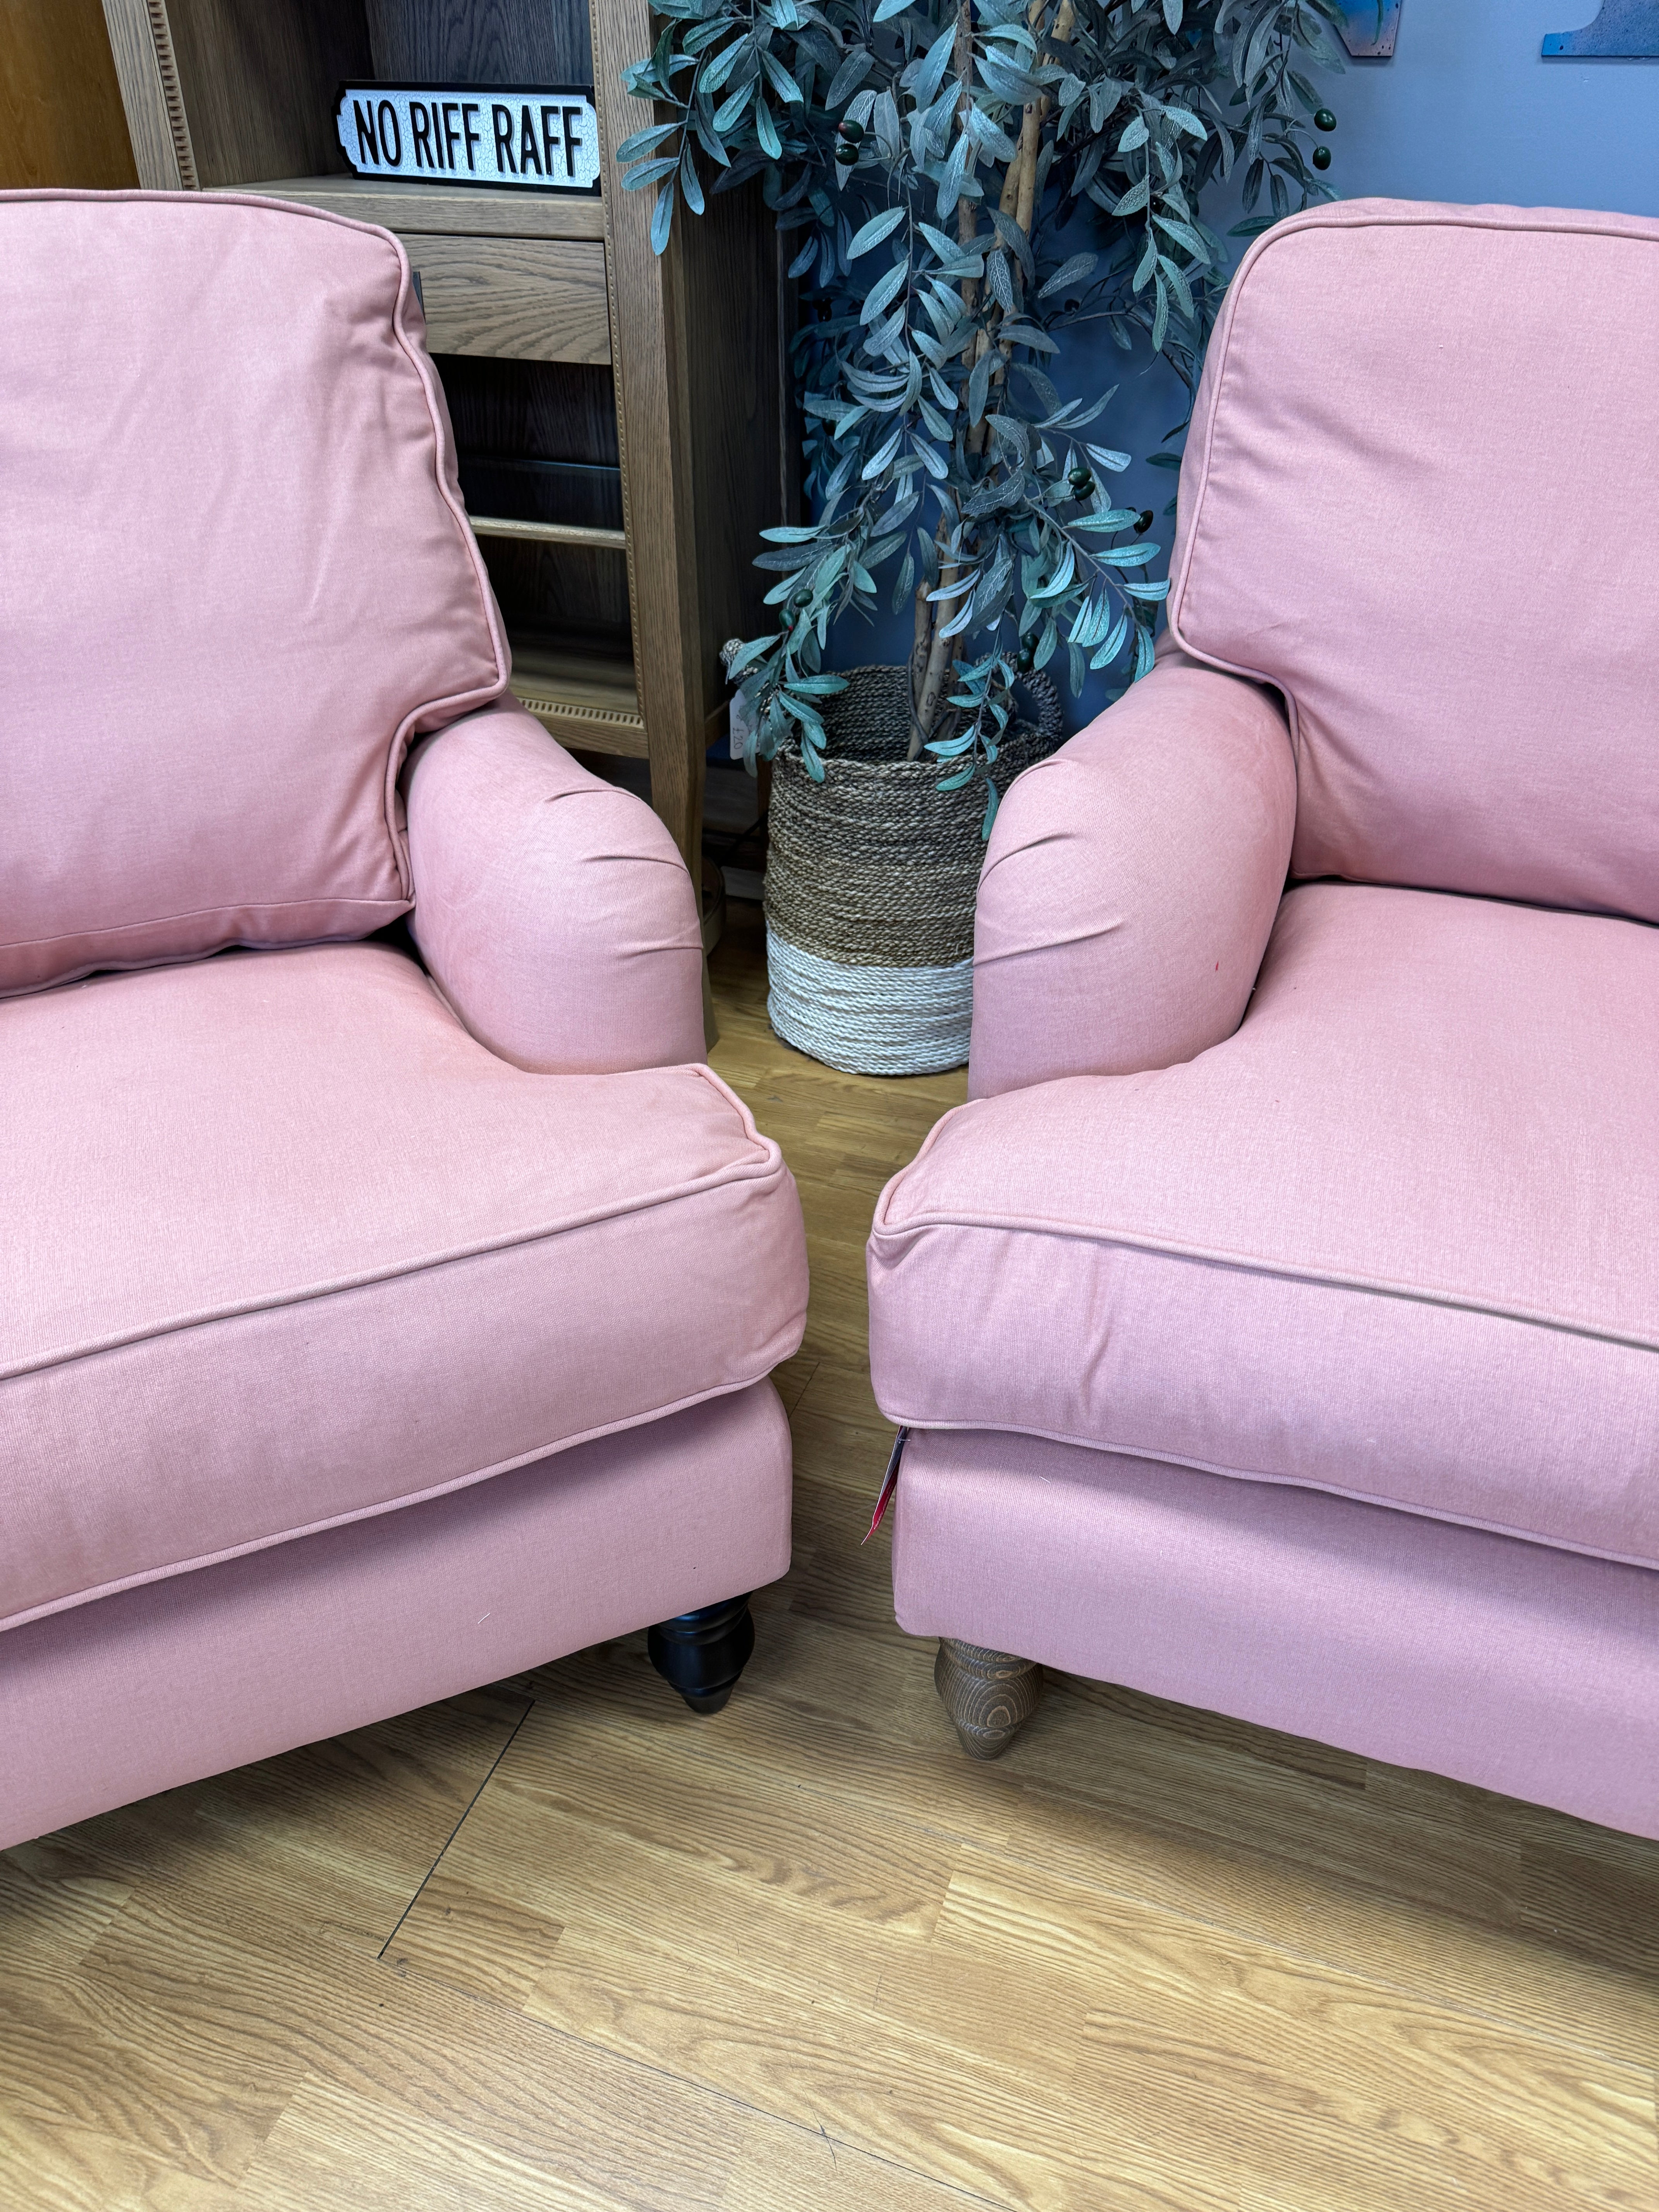 SOFA.COM BLUEBELL 2 seater sofa & matching armchair in Soft Pink cotton